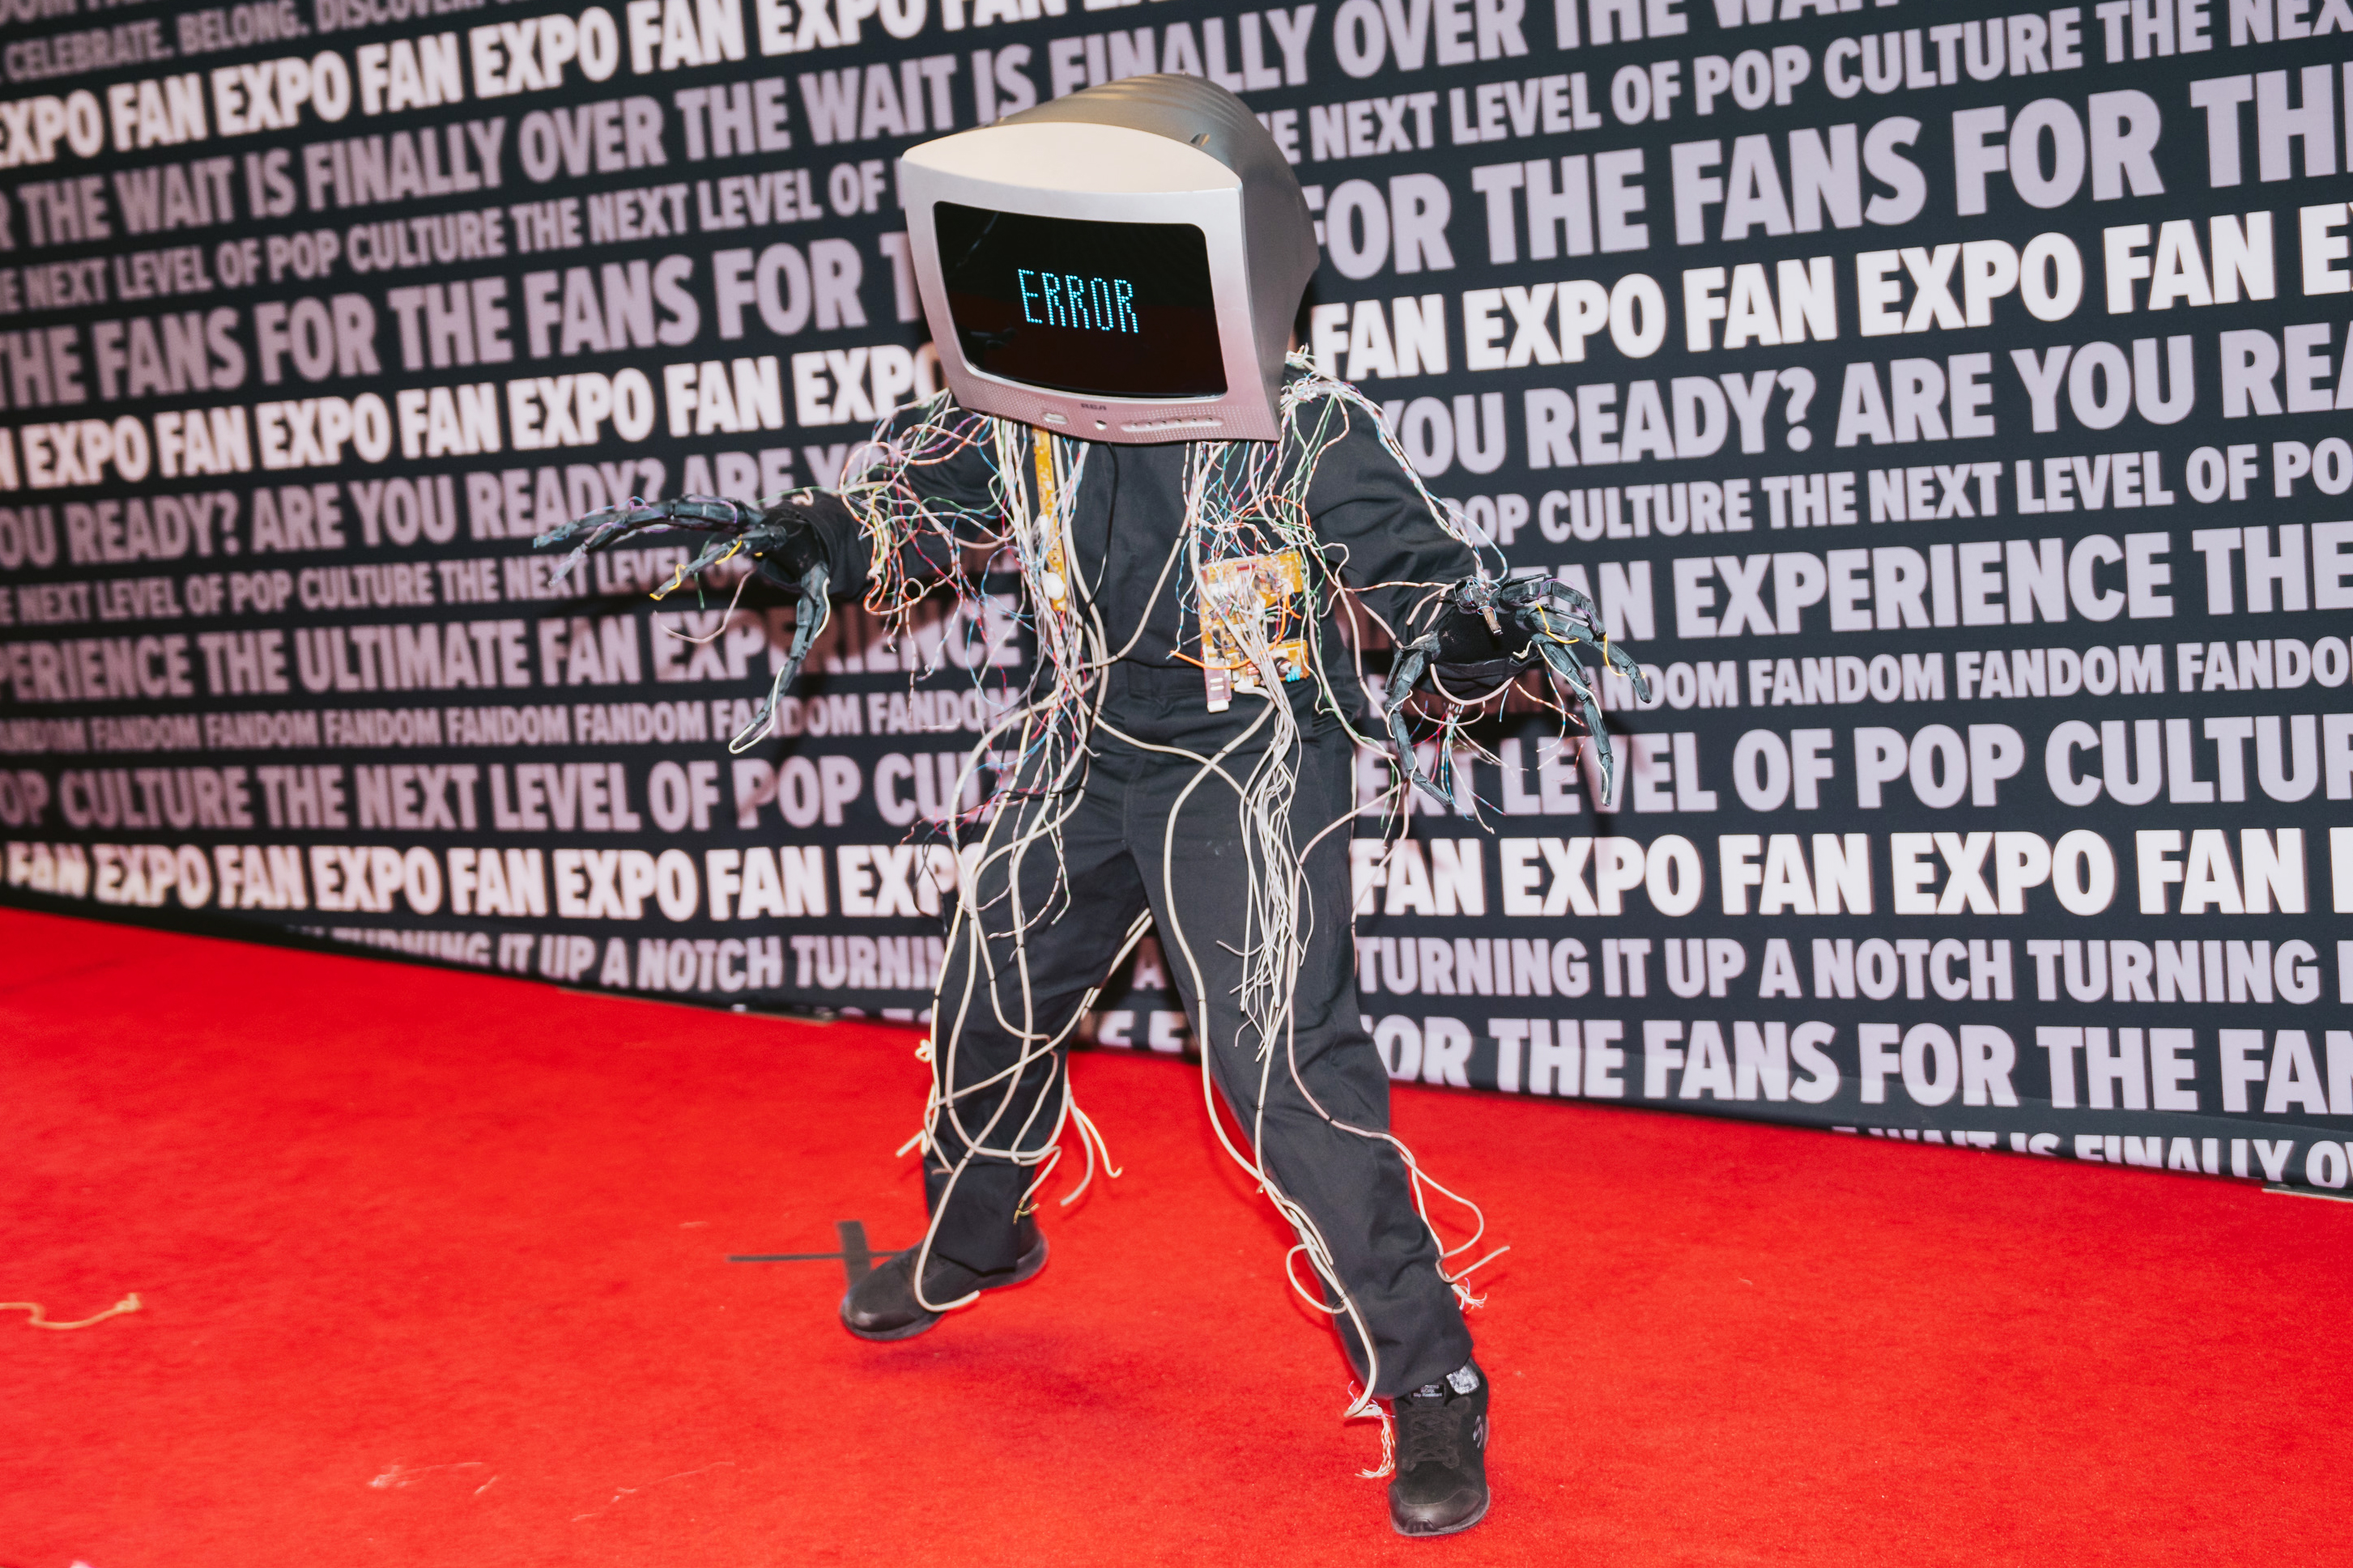 A person wearing a computer on their head while in a costume of cords stands on a red carpet